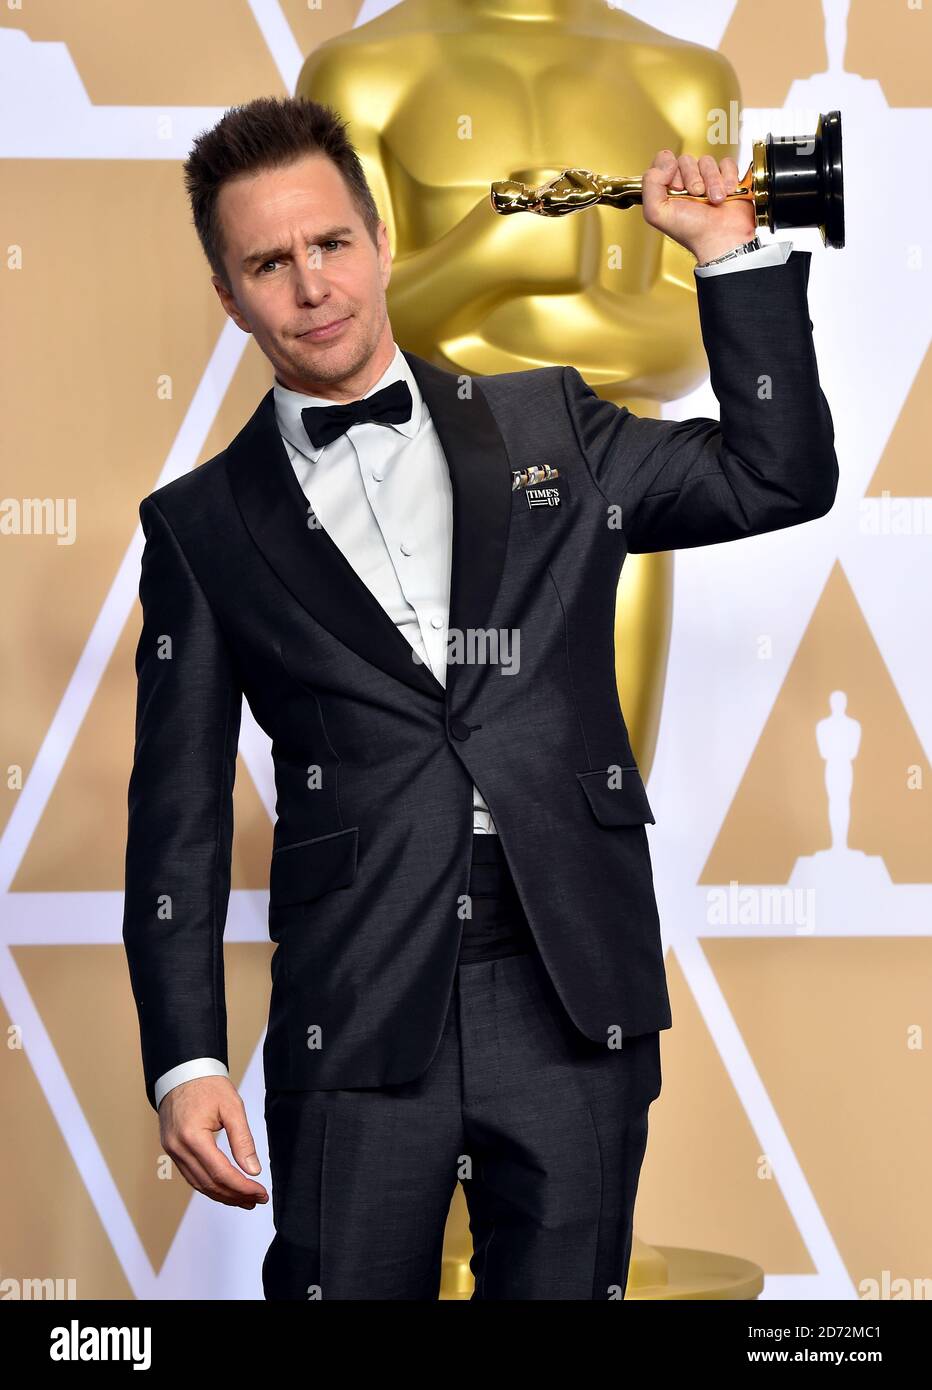 Sam Rockwell with his best supporting actor Oscar for Three Billboards Outside Ebbing, Missouri in the press room at the 90th Academy Awards held at the Dolby Theatre in Hollywood, Los Angeles, USA.Â Photo credit should read: Matt Crossick/EMPICS Entertainment Stock Photo